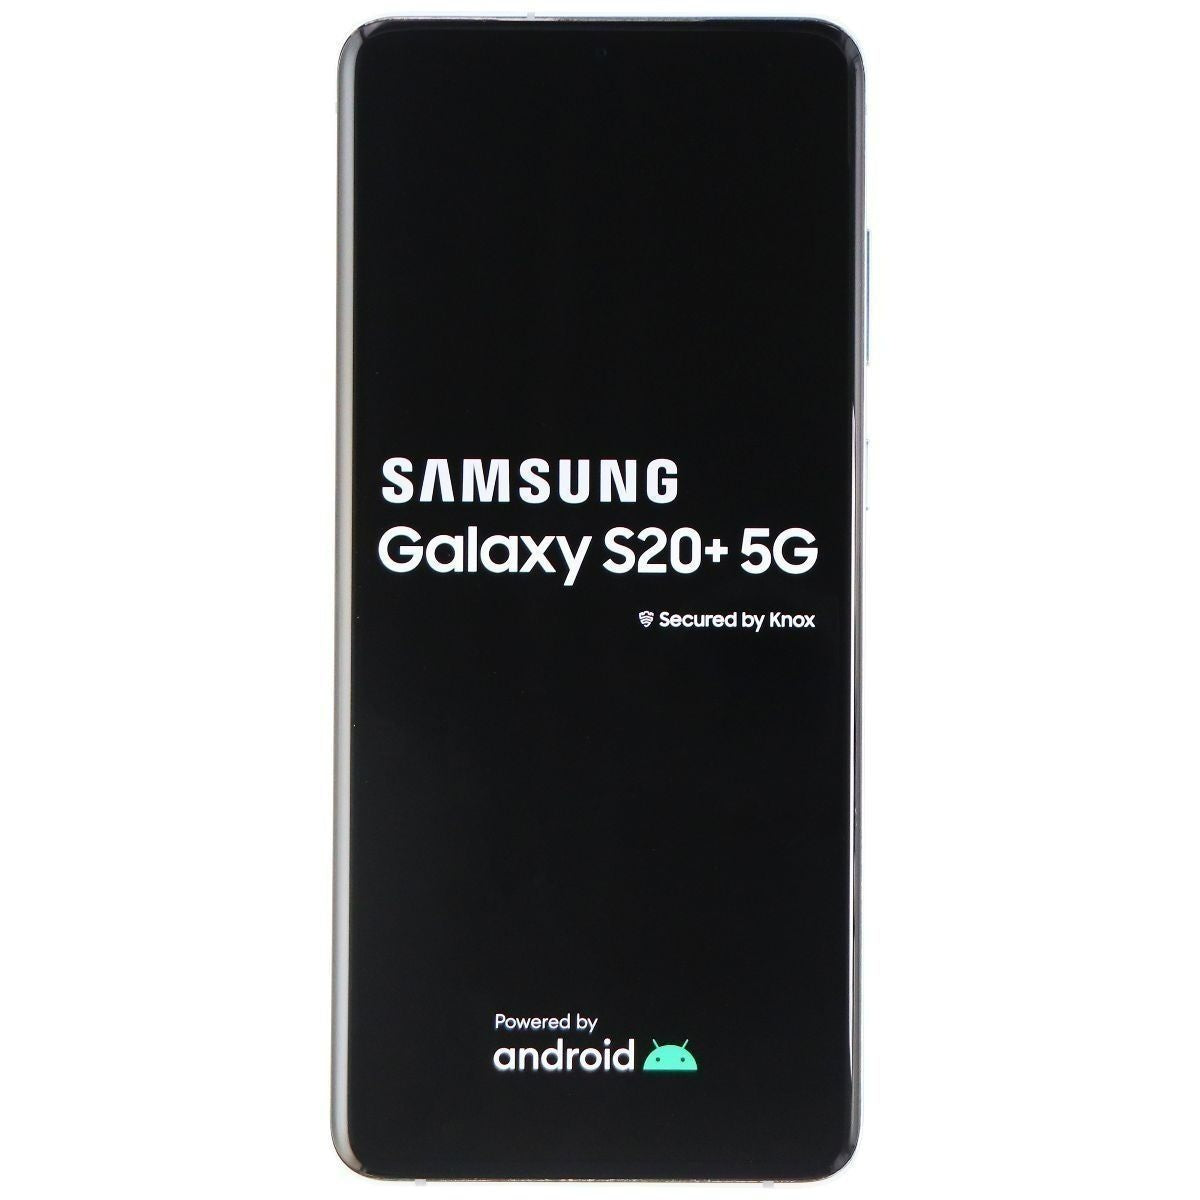 Samsung Galaxy S20+ 5G (6.7-in) (SM-G986U1) Unlocked - 128GB/Cloud Blue Cell Phones & Smartphones Samsung    - Simple Cell Bulk Wholesale Pricing - USA Seller